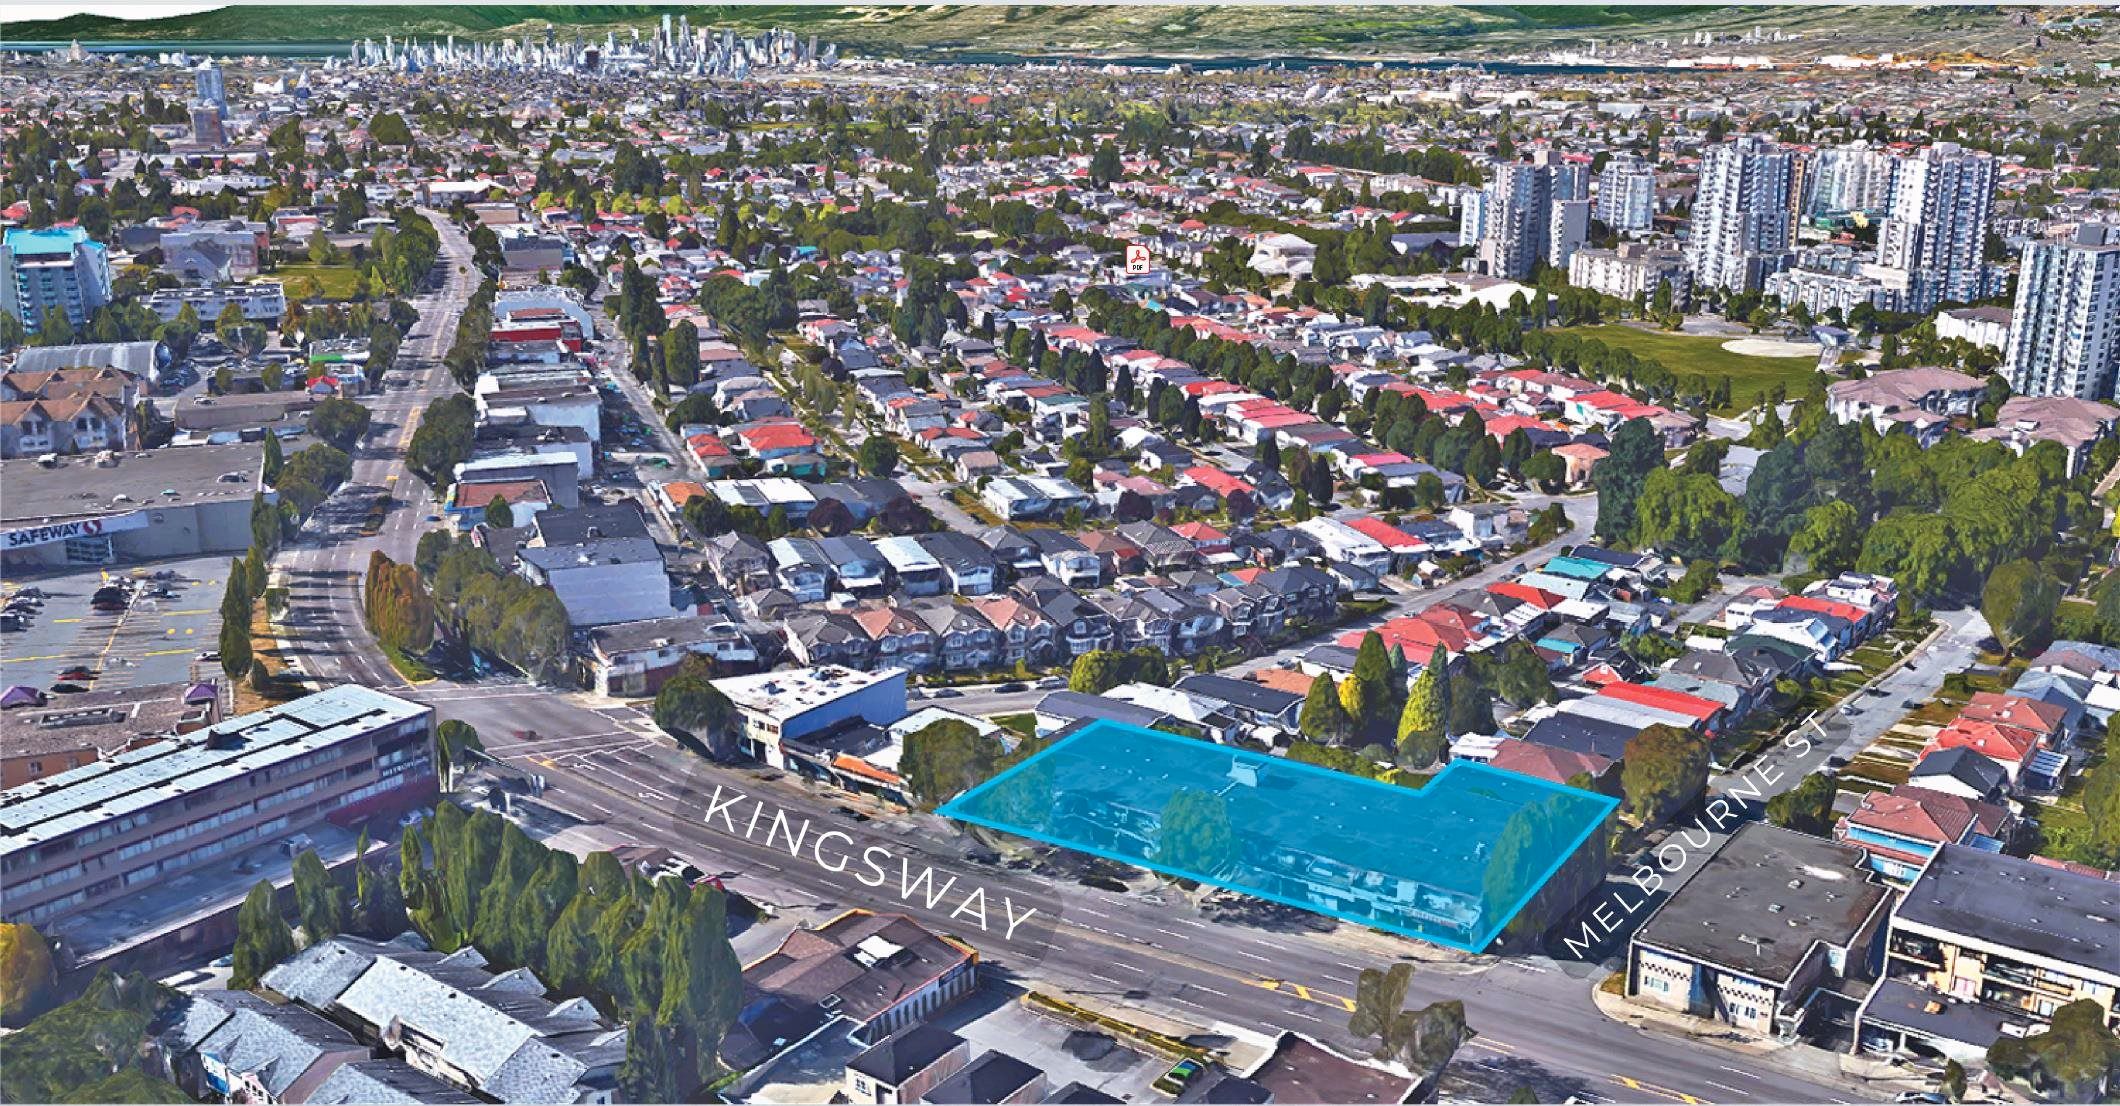 Main Photo: 3479-3499 KINGSWAY in Vancouver: Collingwood VE Land Commercial for sale (Vancouver East)  : MLS®# C8049886